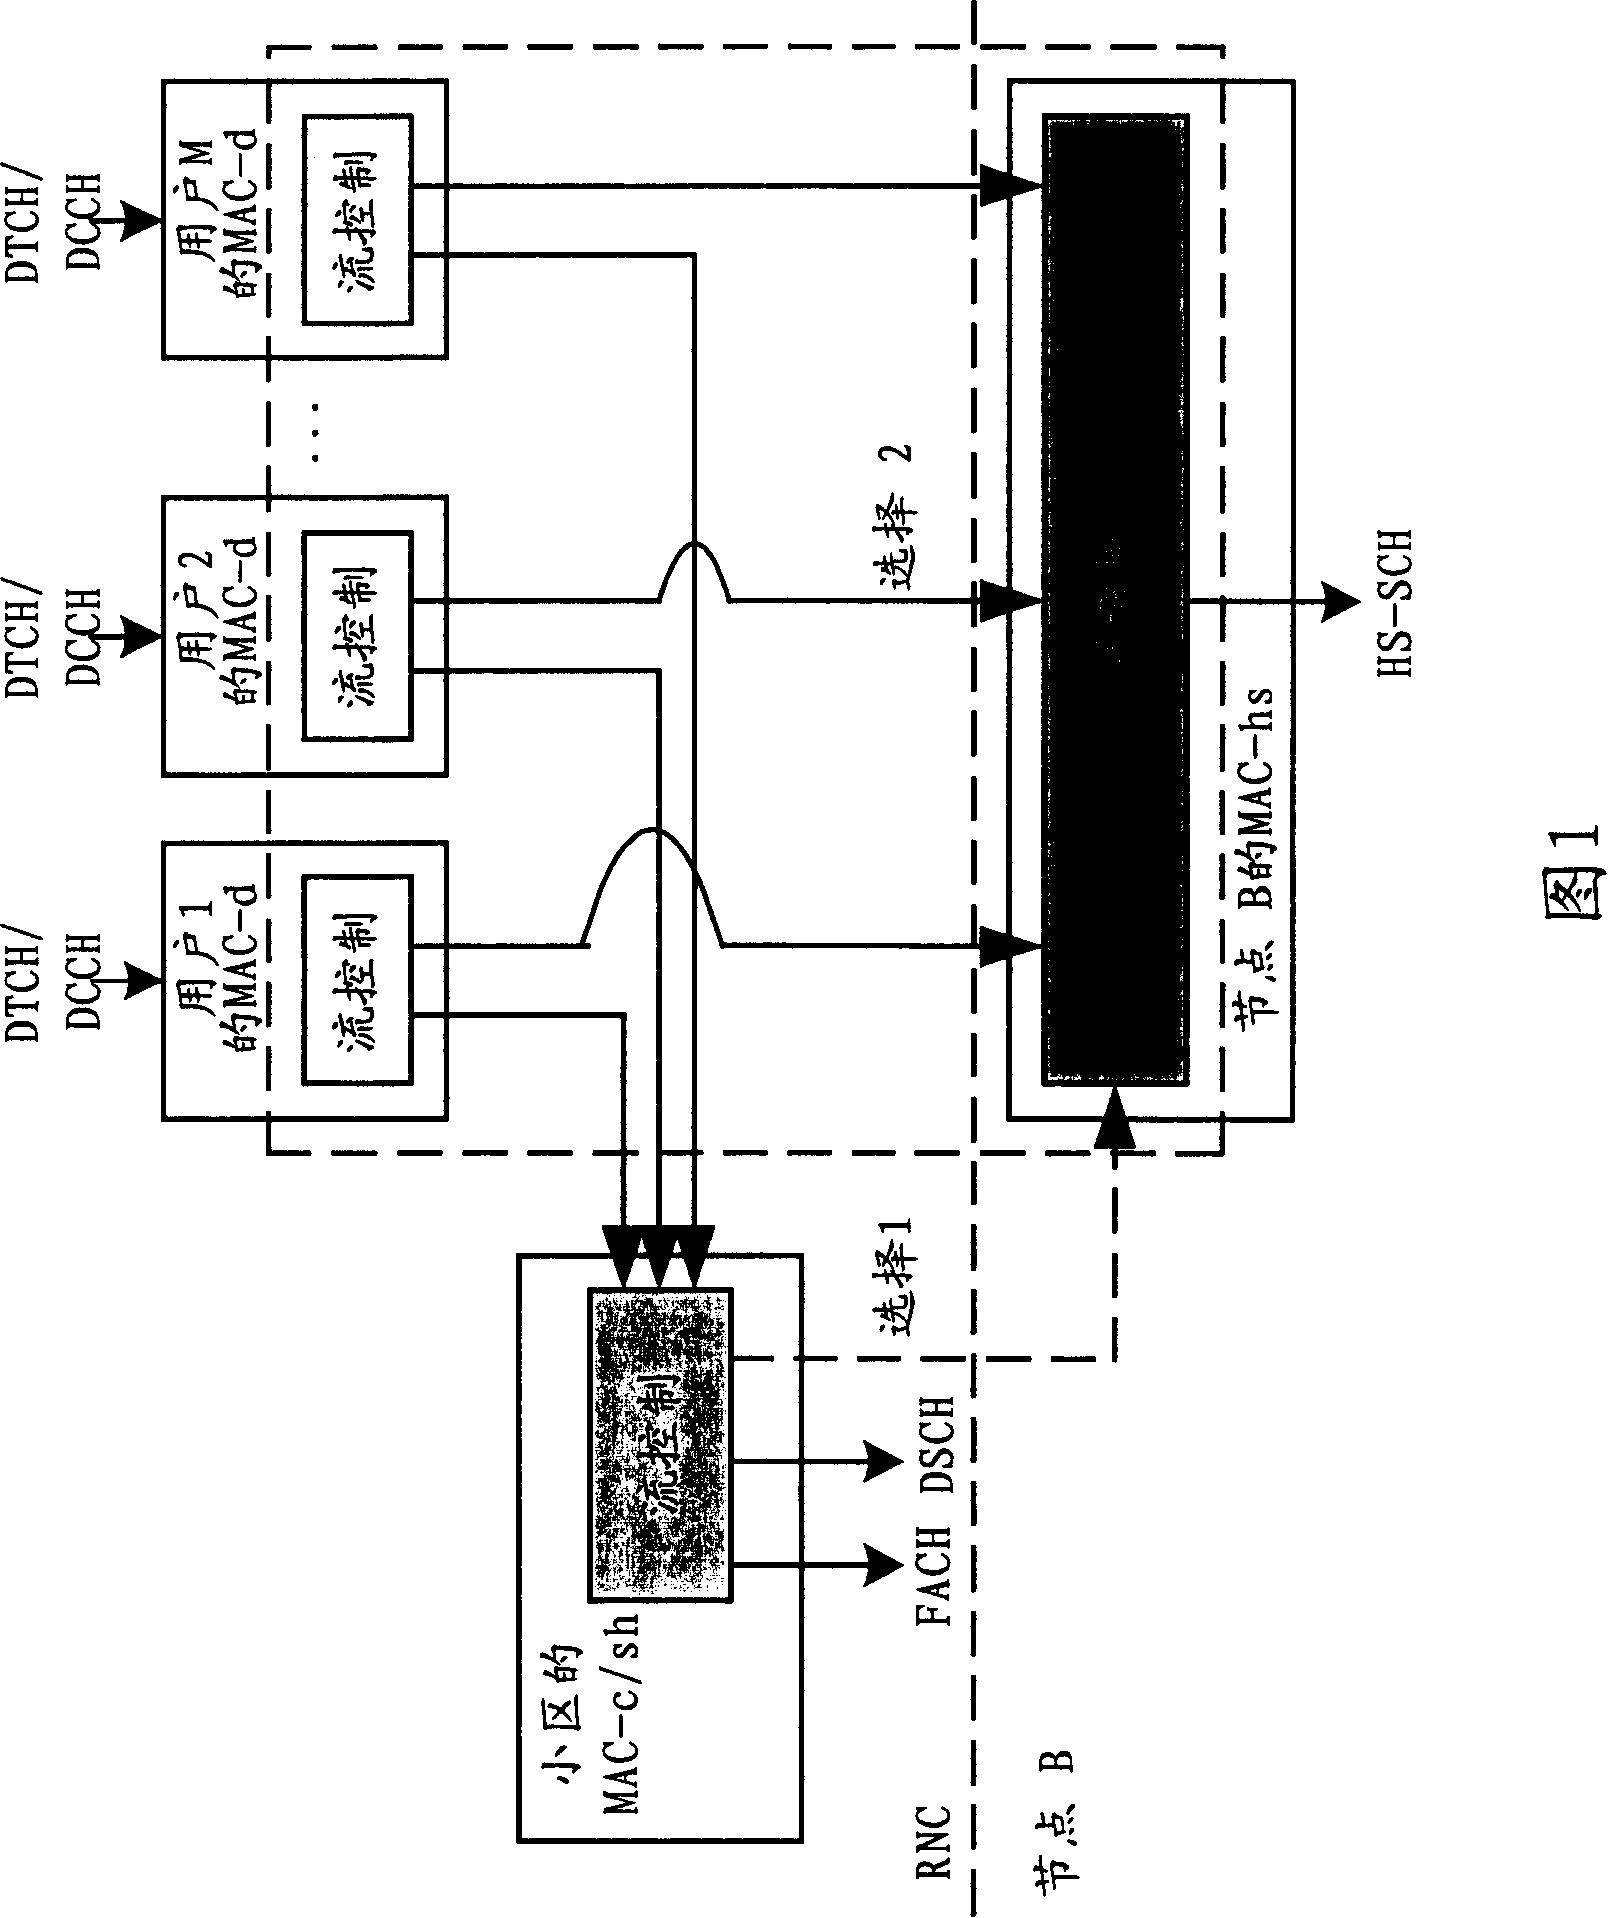 Packet dispatch and flux control method for share transmission channel